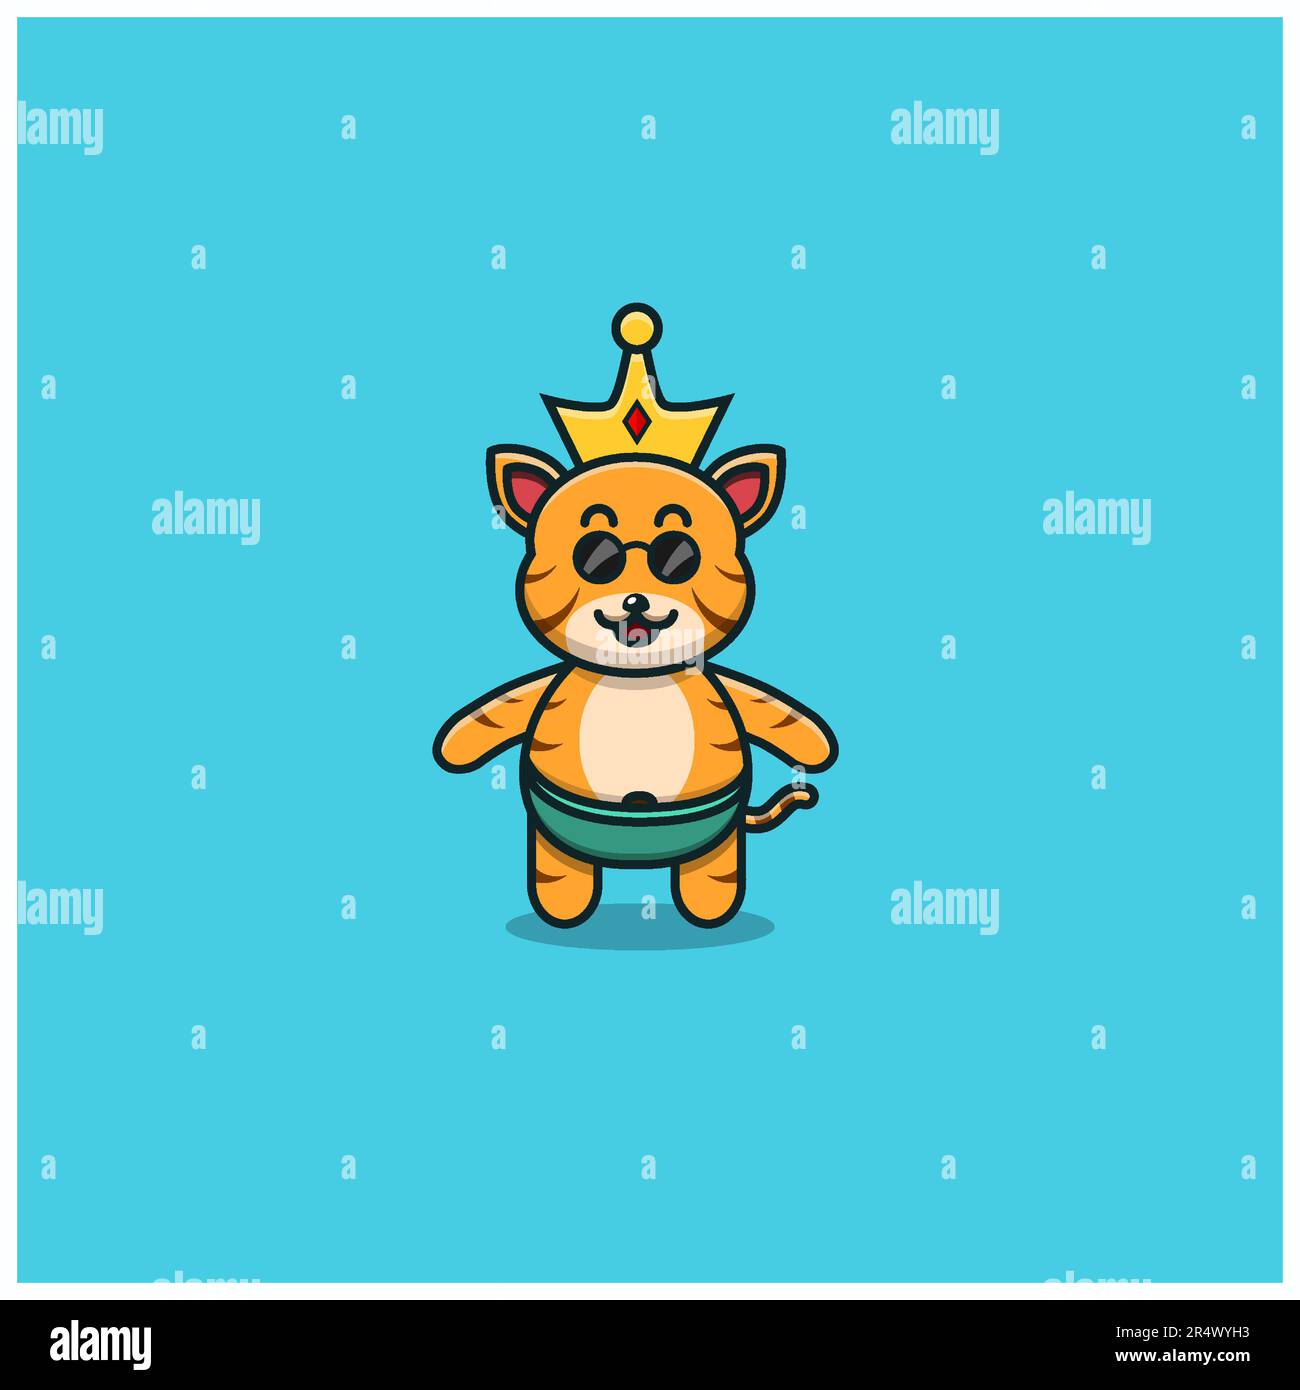 Cute Baby Tiger With Golden Crown. Character, Mascot, Icon, and Cute Design. Vector and Illustration. Stock Vector